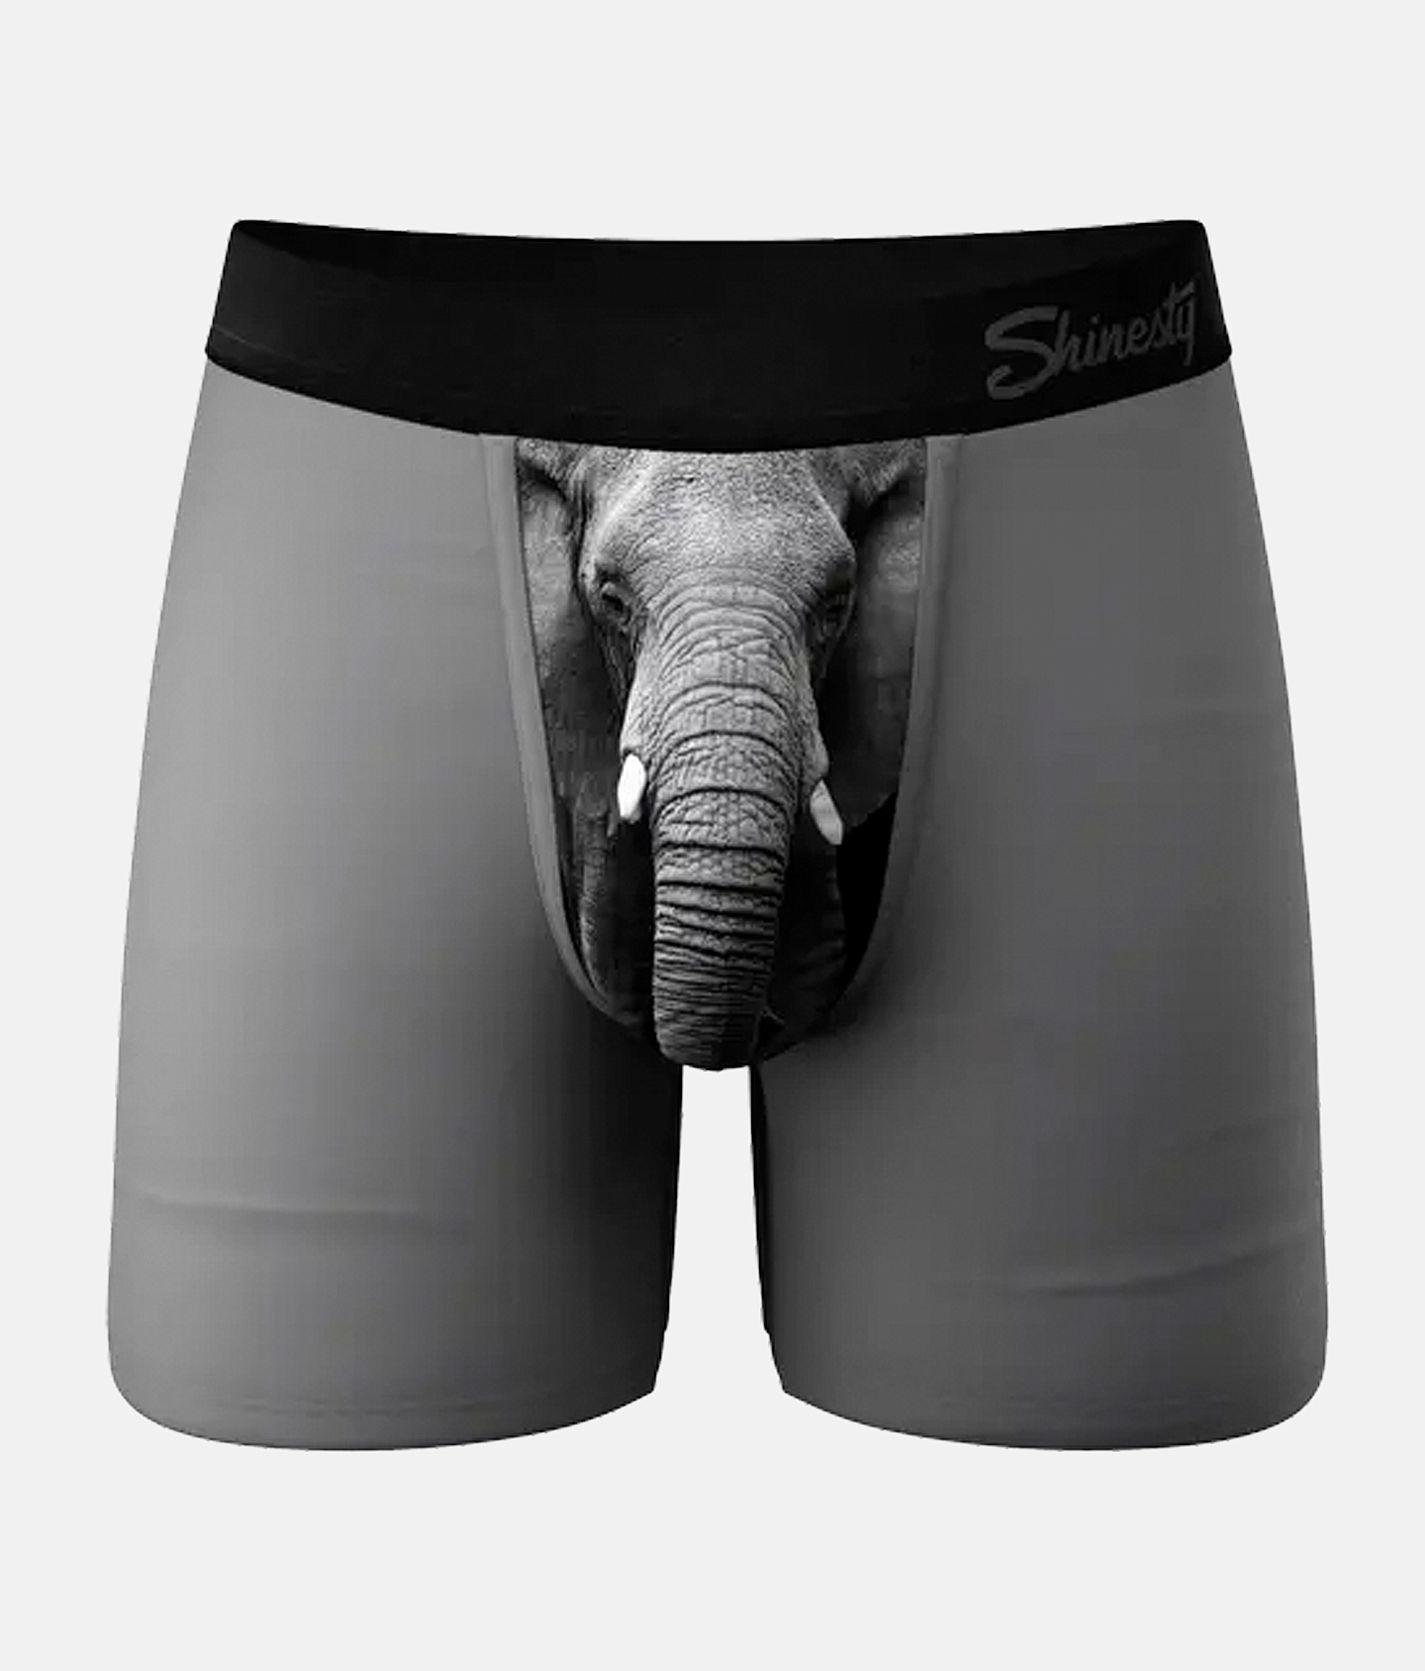 Shinesty® The Elephant Stretch Boxer Briefs - Men's Boxers in Grey